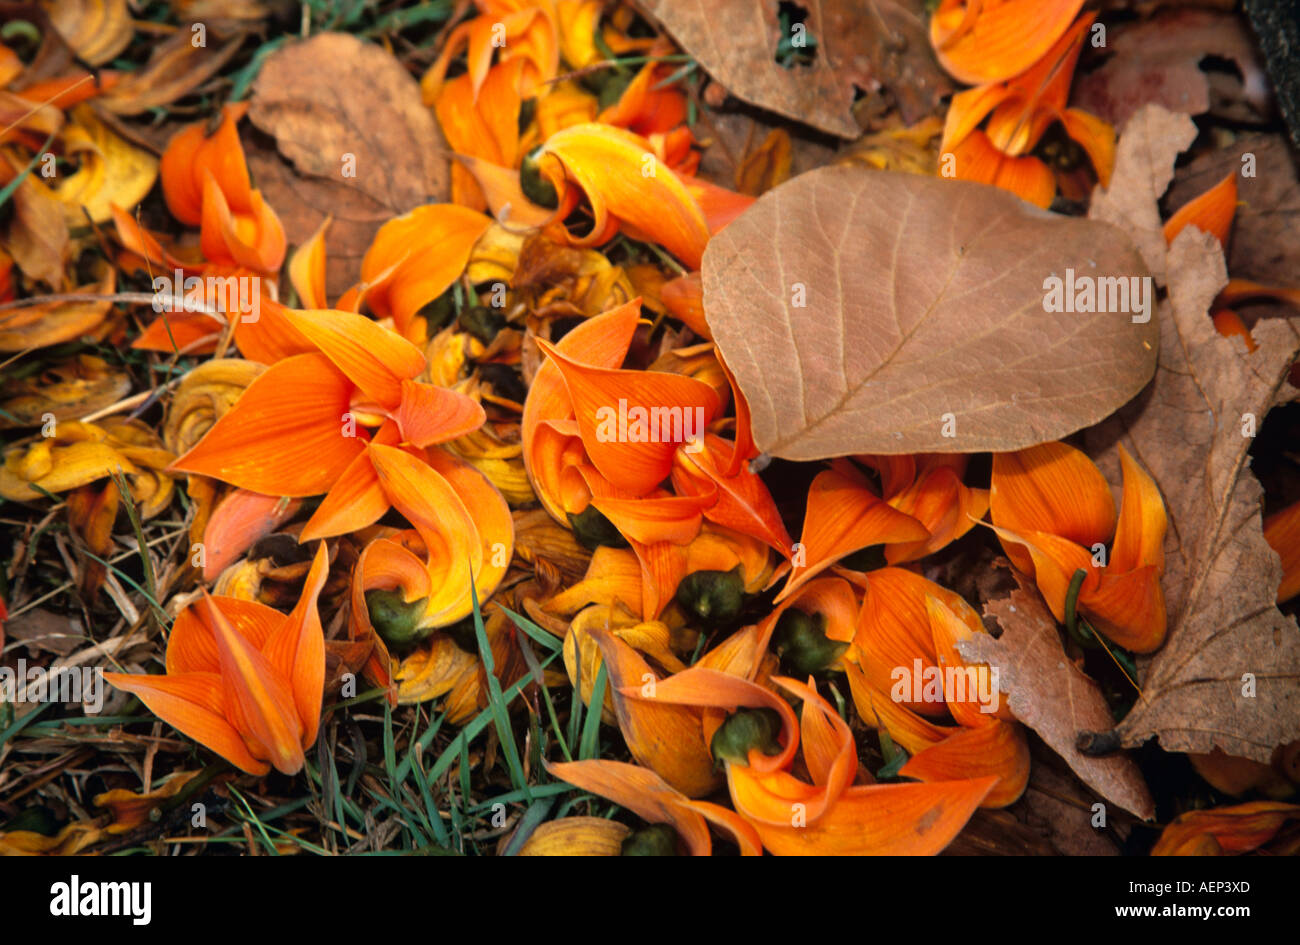 Brightly coloured flowers from a coral tree, Erythrina subumbrans, on the ground, Thailand Stock Photo